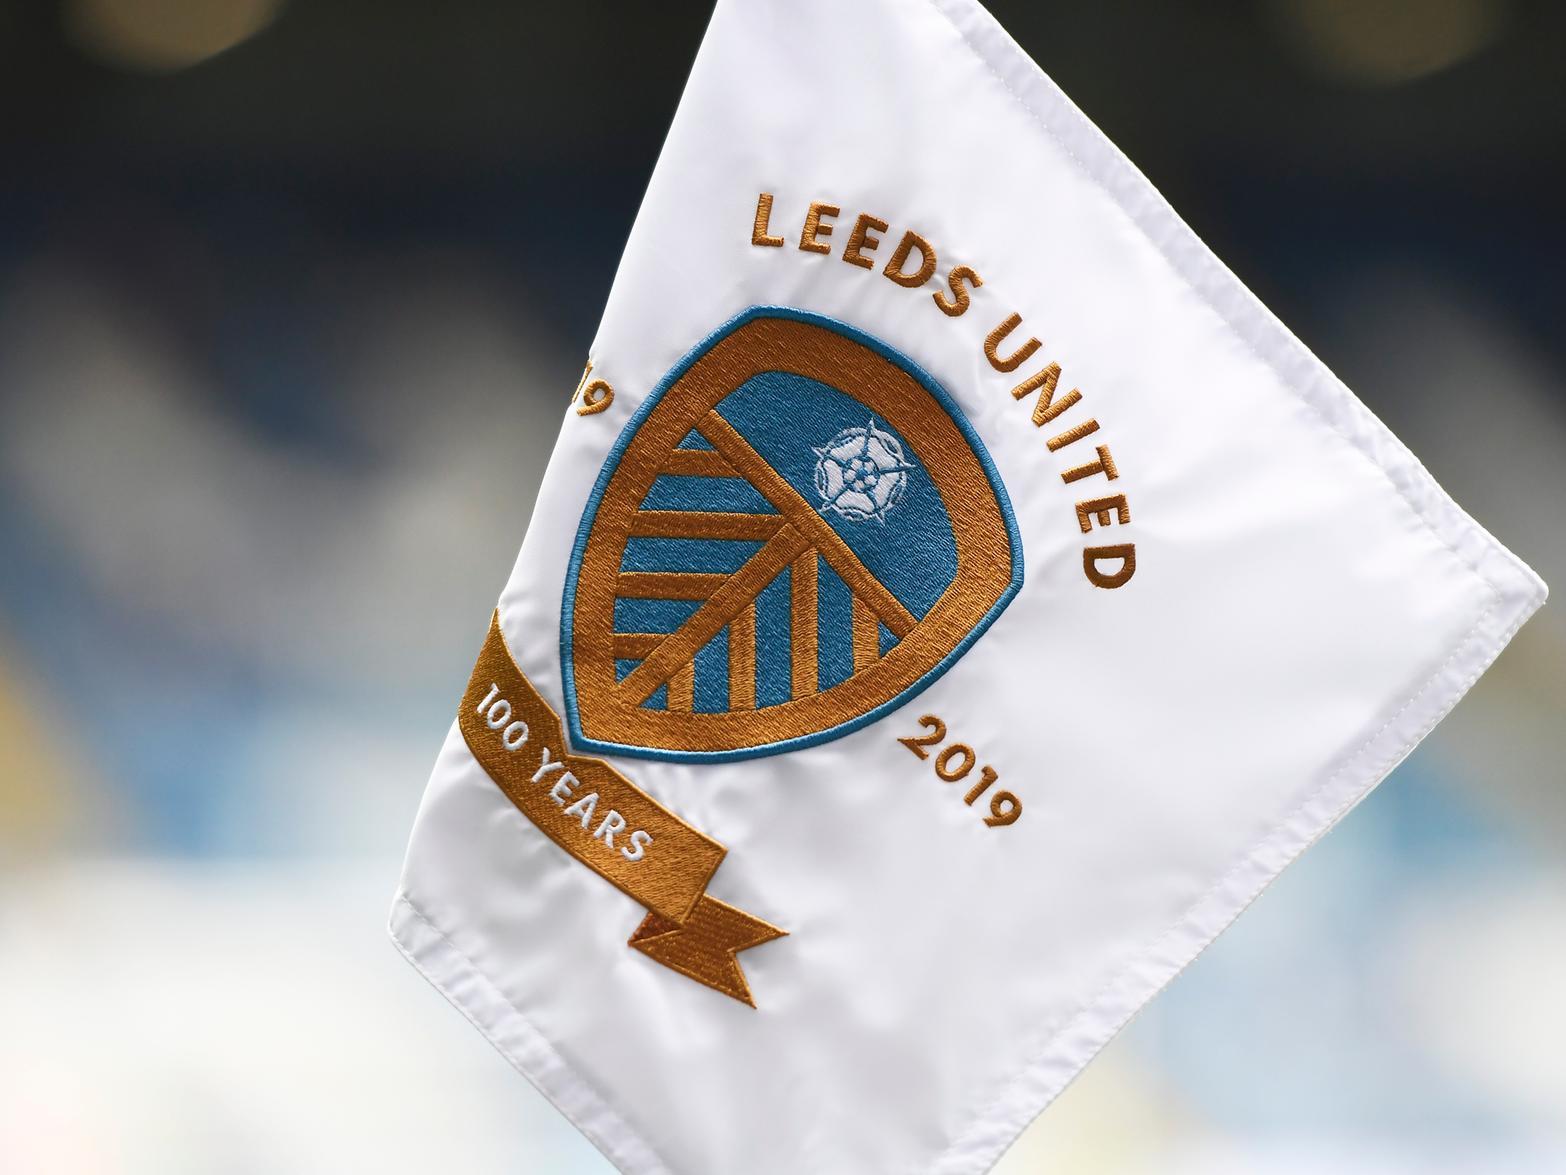 Pundit Noel Whelan has suggested that Leeds United won't buy a single player in January, but has claimed it would be a risky move given the lack of depth in key positions. (The 72)